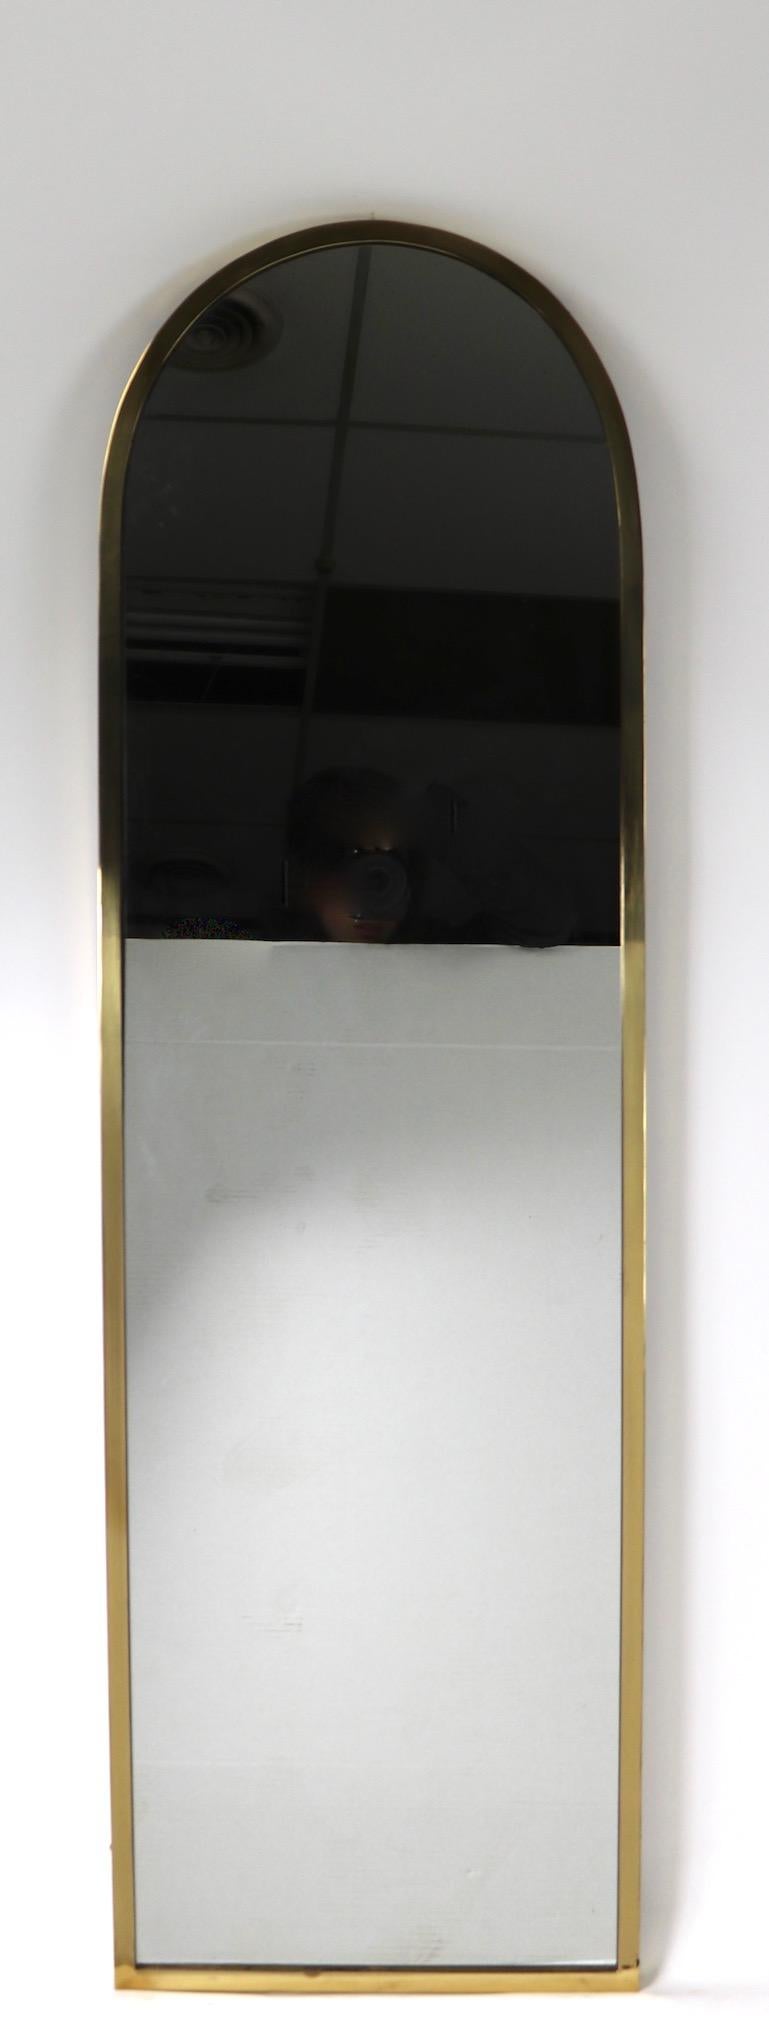 Brass frame of tombstone form, with plate glass mirror, labeled Made in Italy, attributed to Mastercrafters. Simple elegant design, high quality materials, and construction.
 Very good original condition, clean ready to hang.